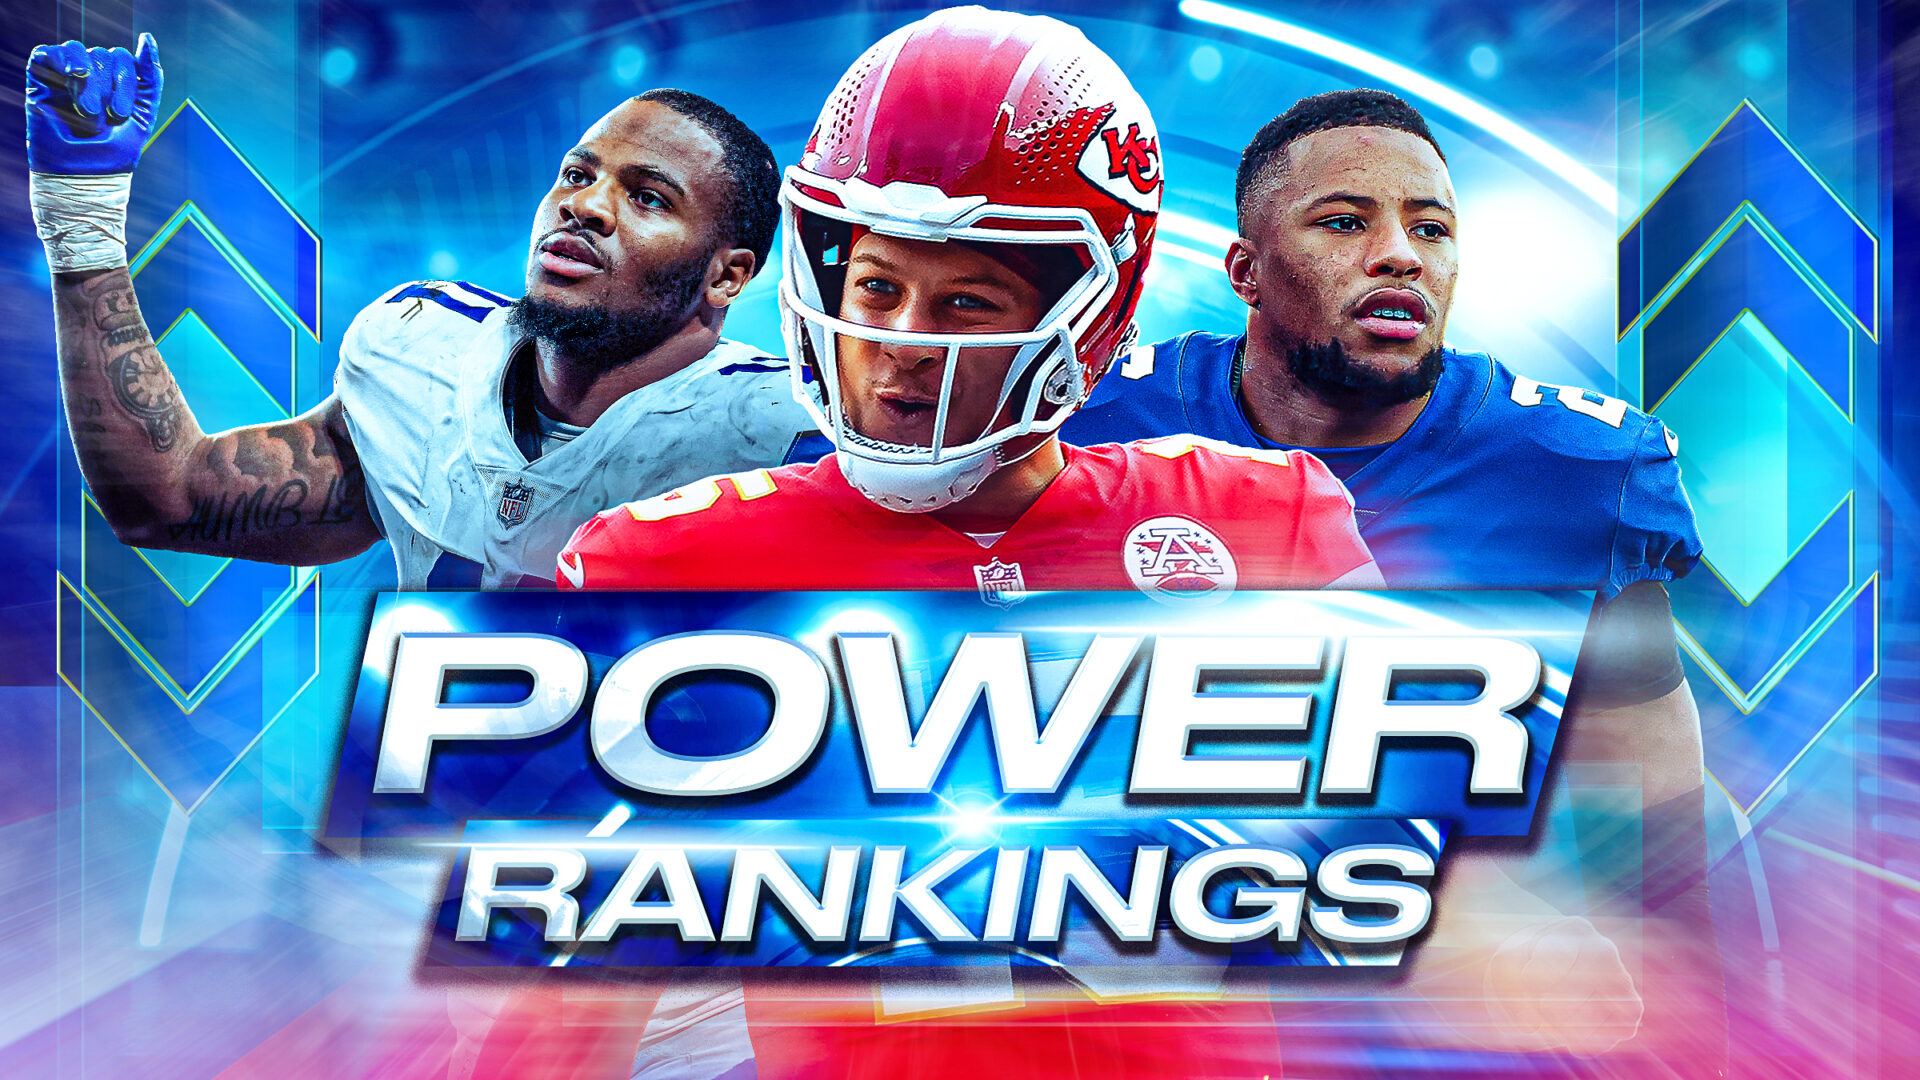 2023 NFL Power Rankings: Where Does Every Team Stand Entering Season?